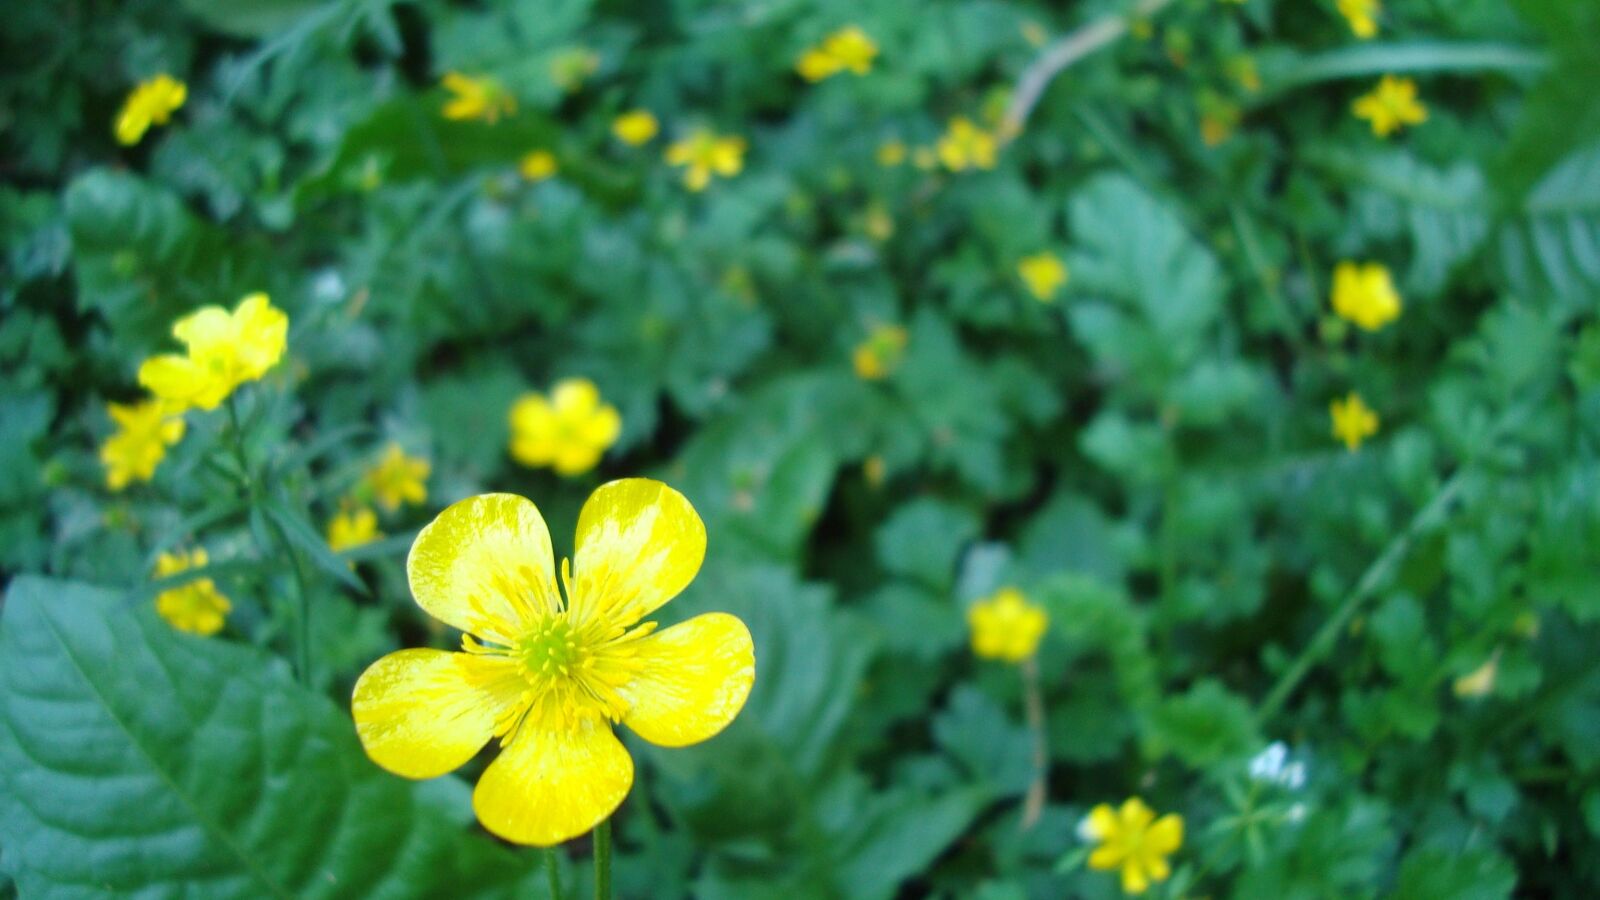 Sony Cyber-shot DSC-W120 sample photo. Buttercup, yellow flower, plant photography